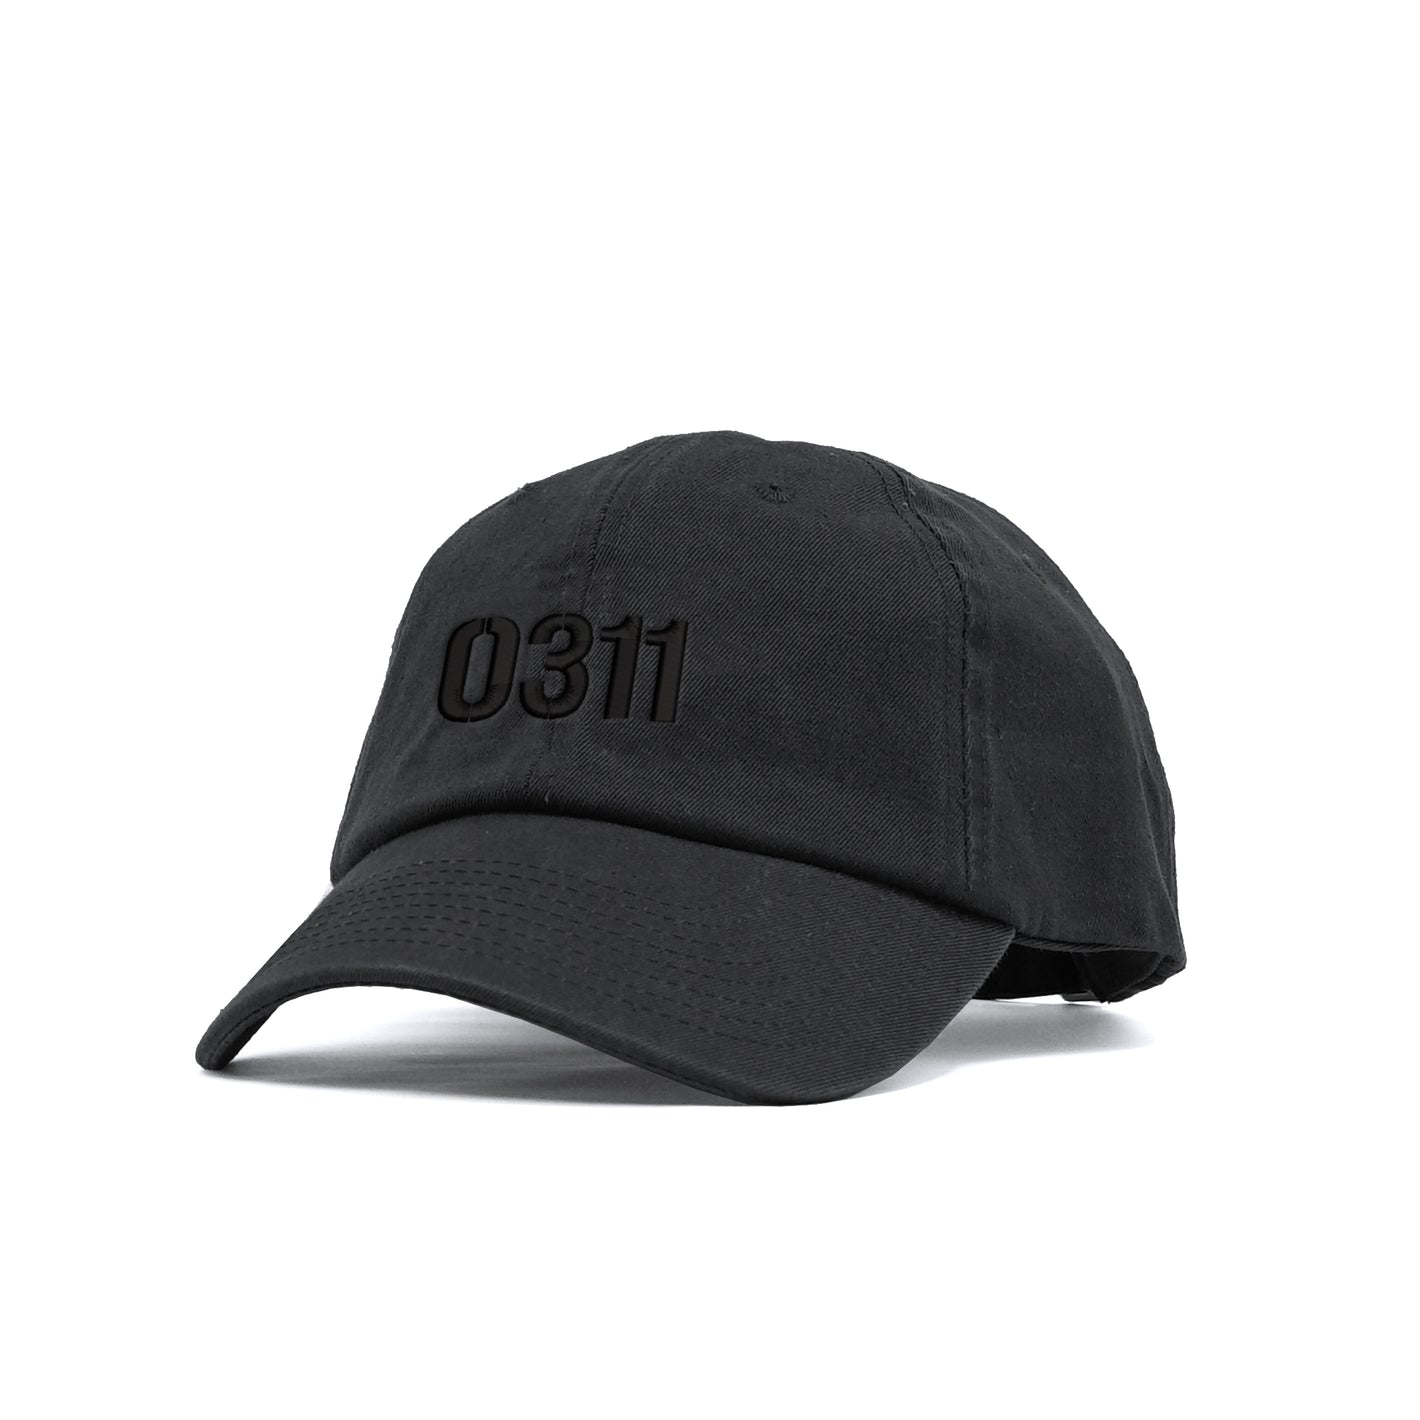 0311 Blackout Unstructured Hat with 3D embroidery- Black Hat w/ Black